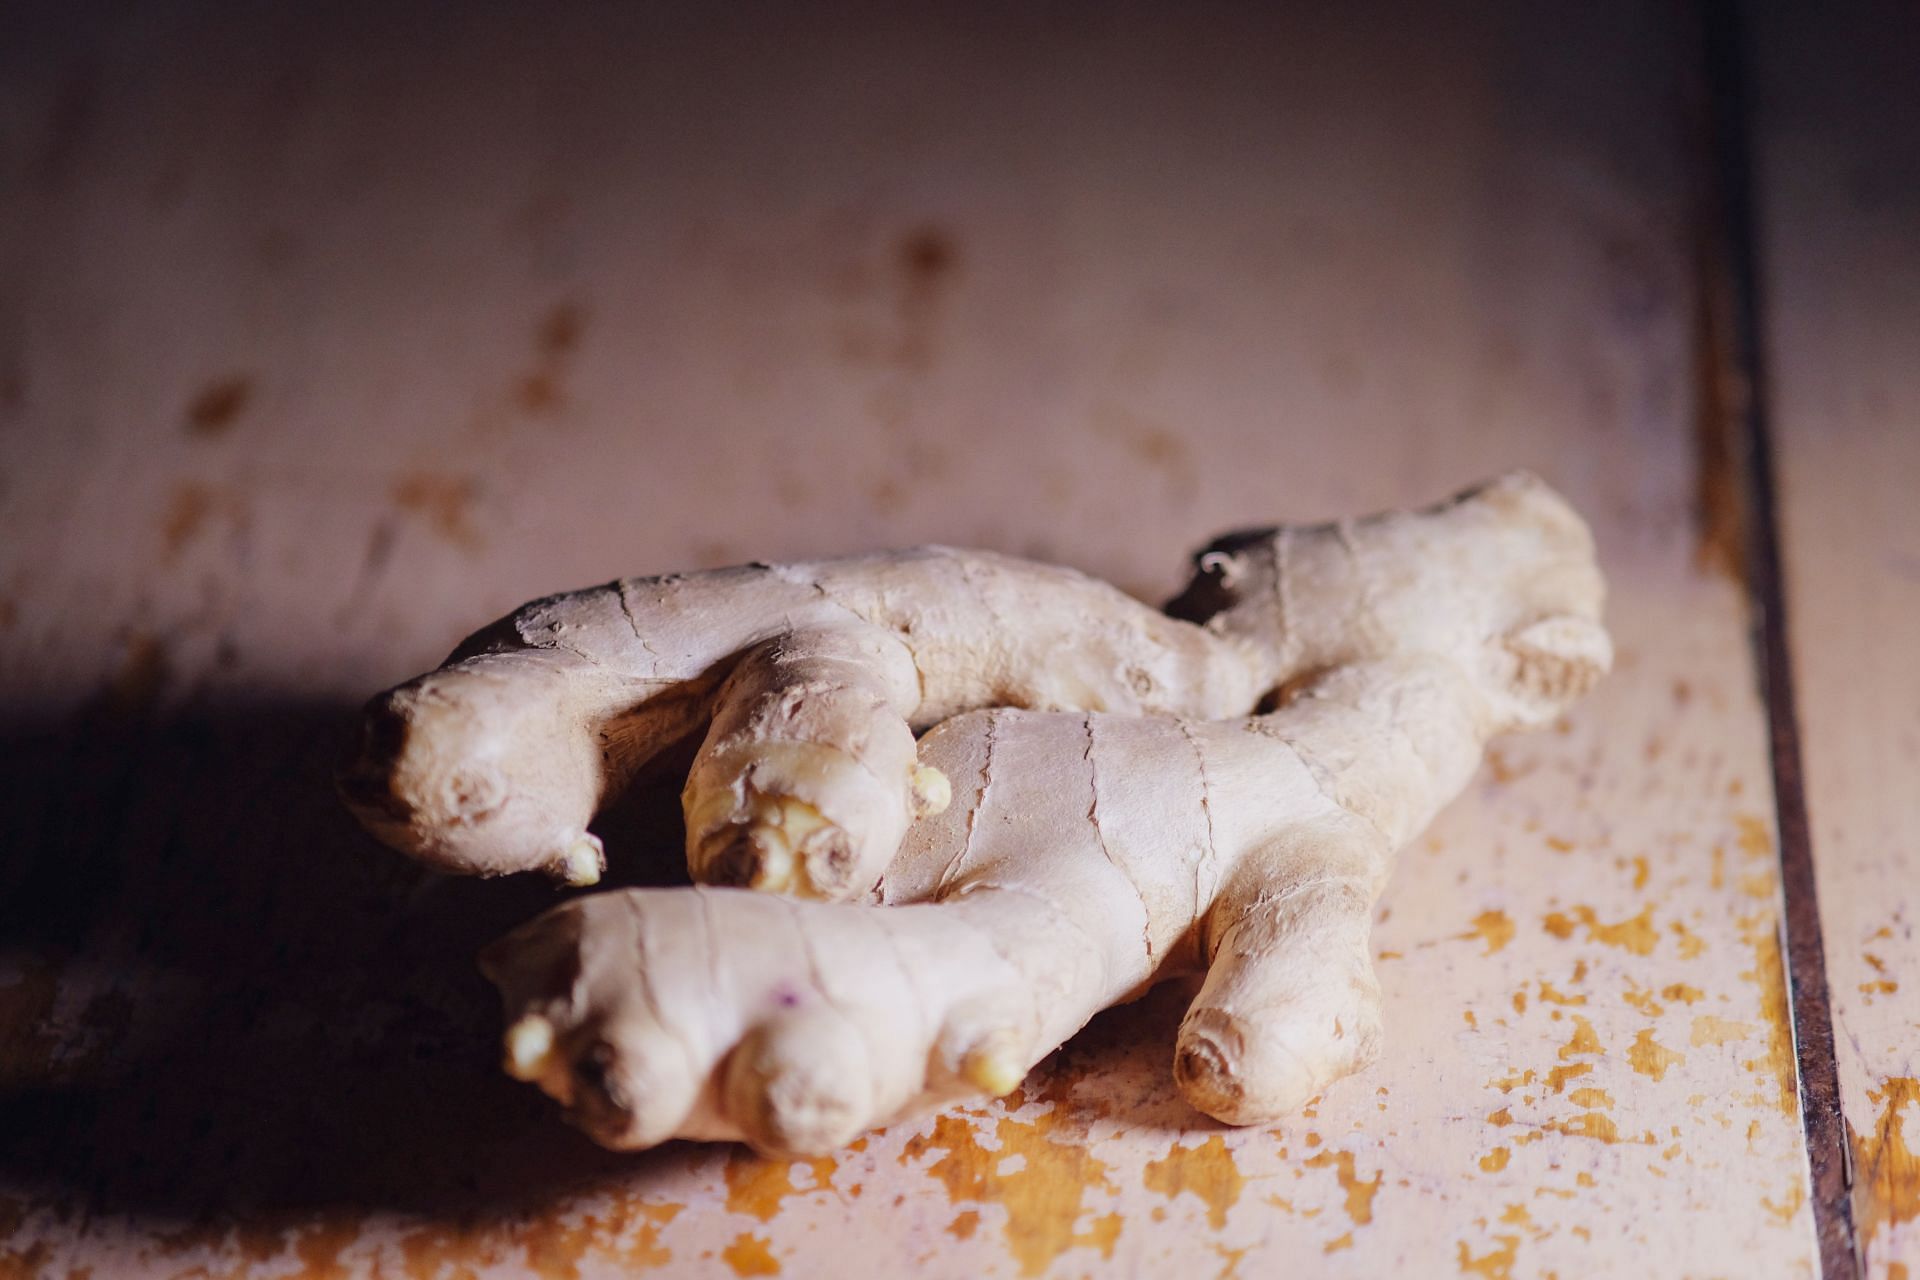 Ginger shots are easy to make at home. (Image via Unsplash / Lawrence Aritao)